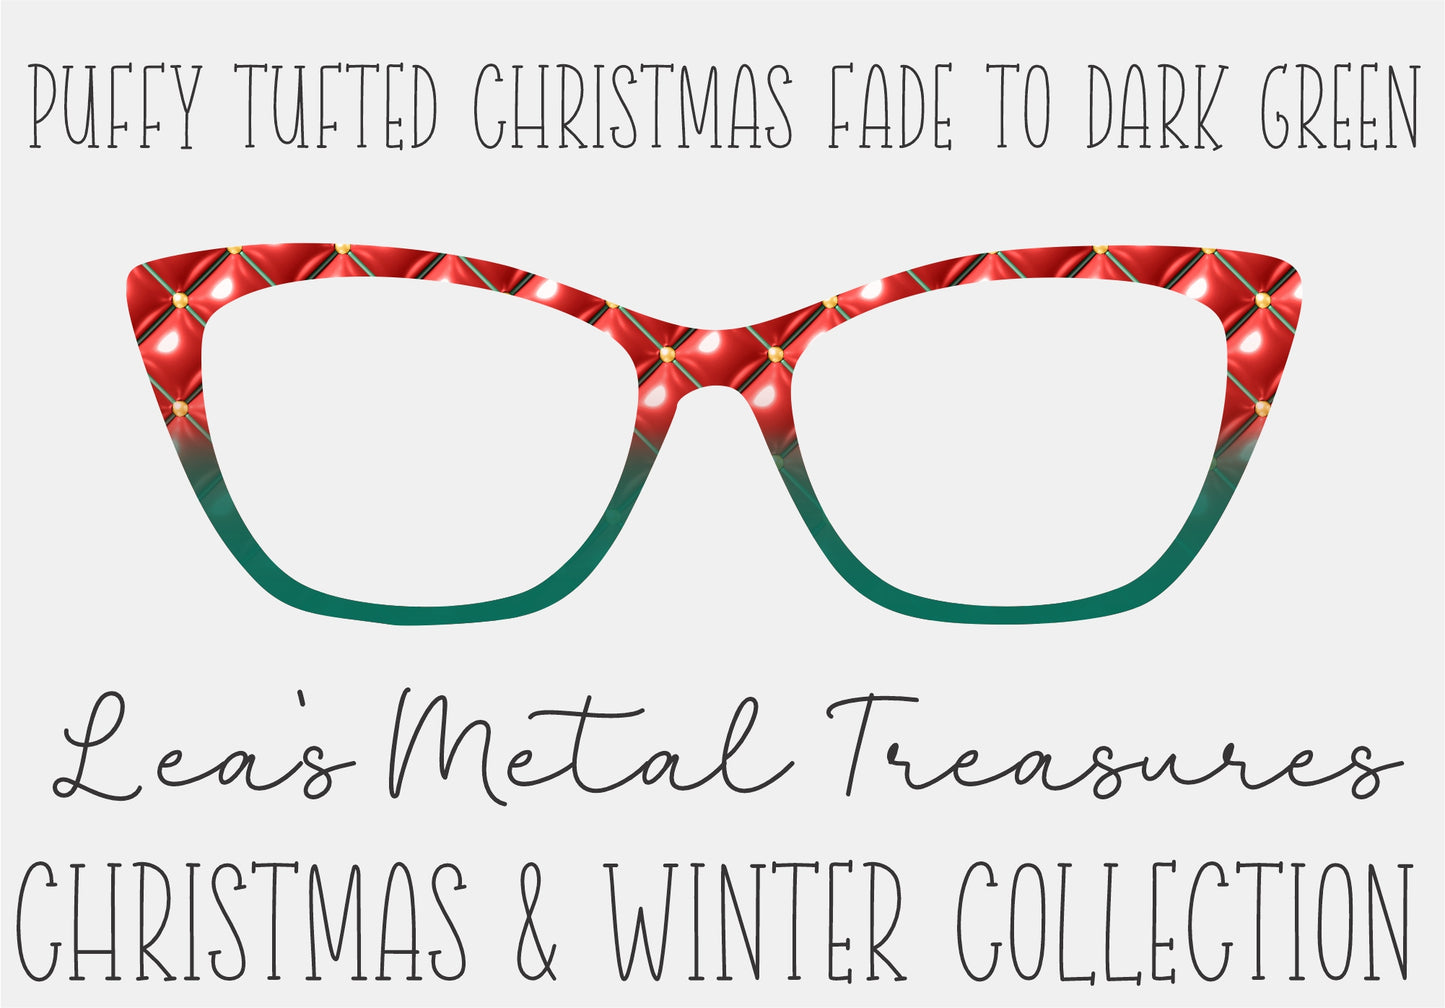 PUFFY TUFTED CHRISTMAS FADE TO DARK GREEN Eyewear Frame Toppers COMES WITH MAGNETS